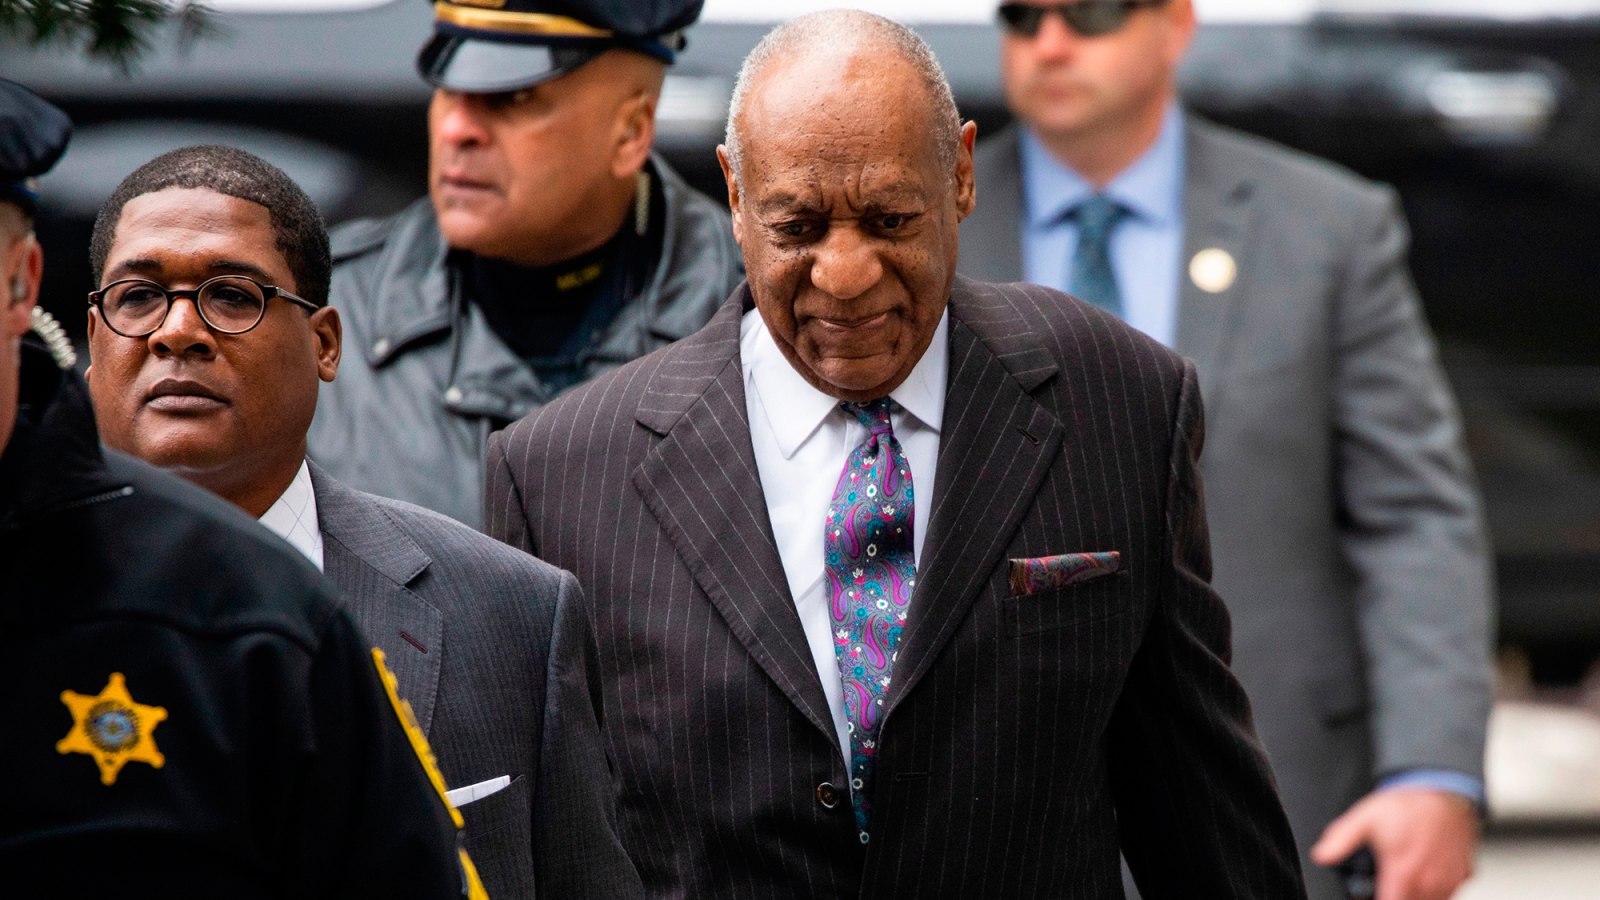 Comedian Bill Cosby arrives for the first day of his second trial